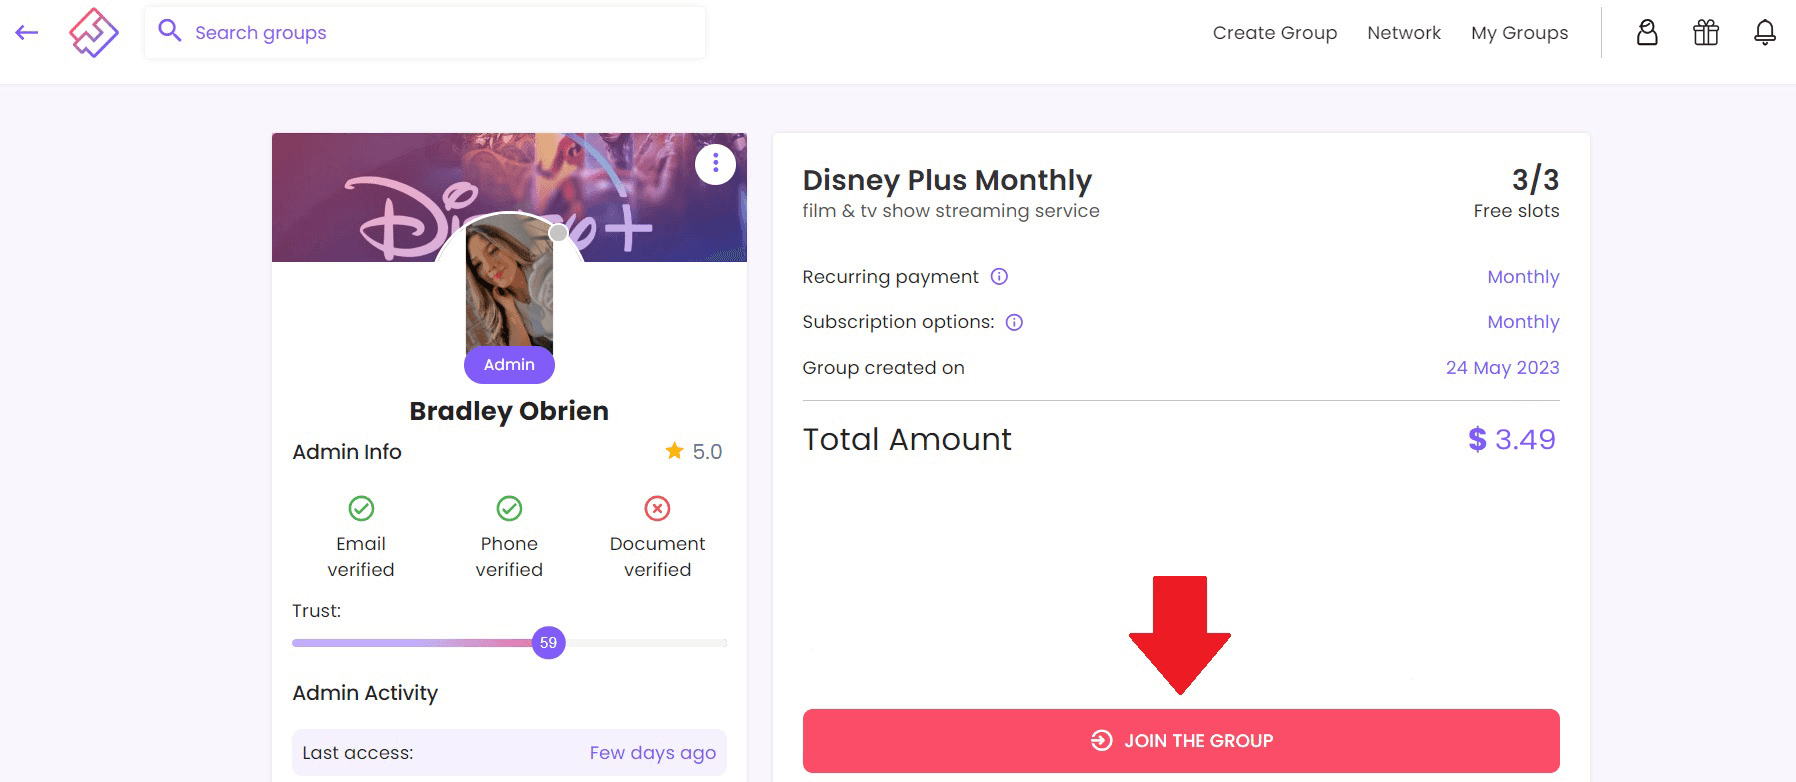 How to become a joiner and share a Disney Subscription. The Disney Plus price increase has put you off opening a subscription? No proble! With Together Price you can share someone else's membership and enjoy the benefits of Disney Plus, Marvel Studios, National Geographic and Star Wars at a fraction of the price. Price hikes are not a problem any more with Together Price!